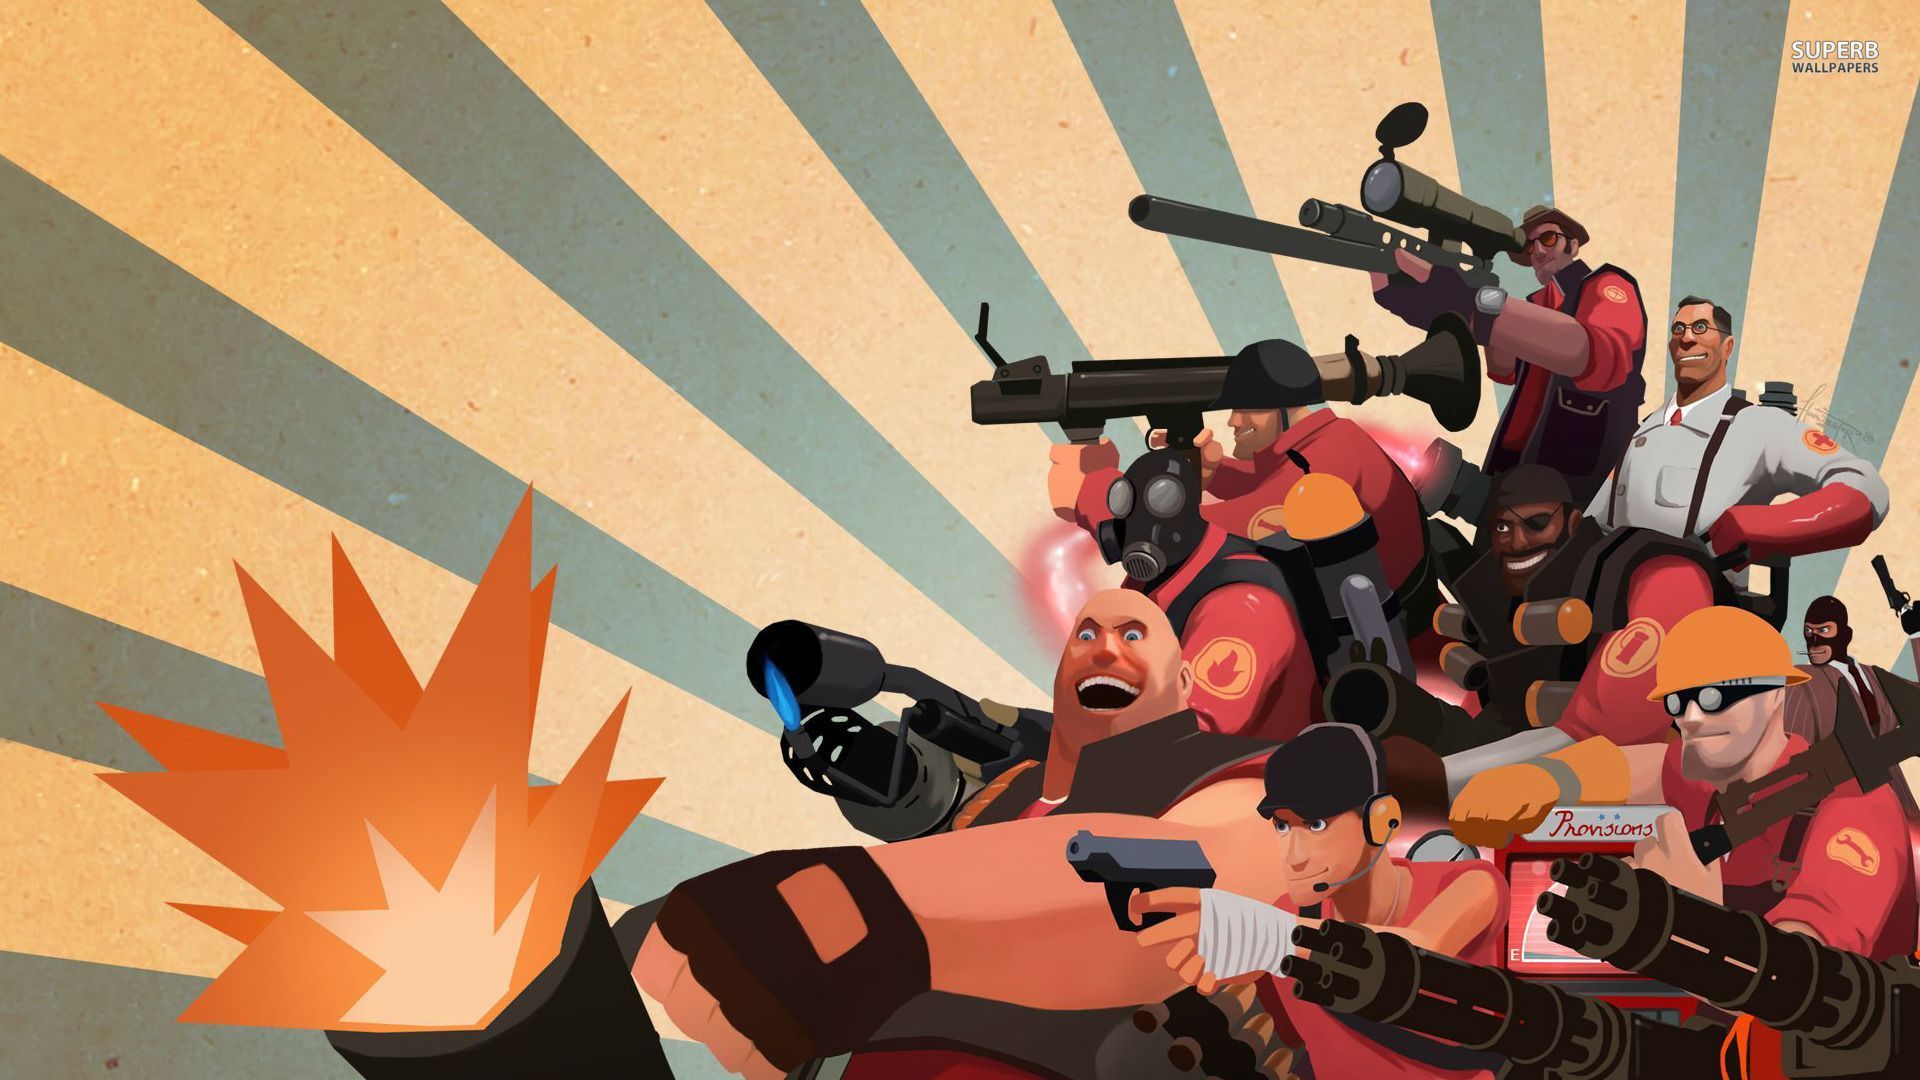 Team Fortress 2 Wallpapers High Quality Download Free